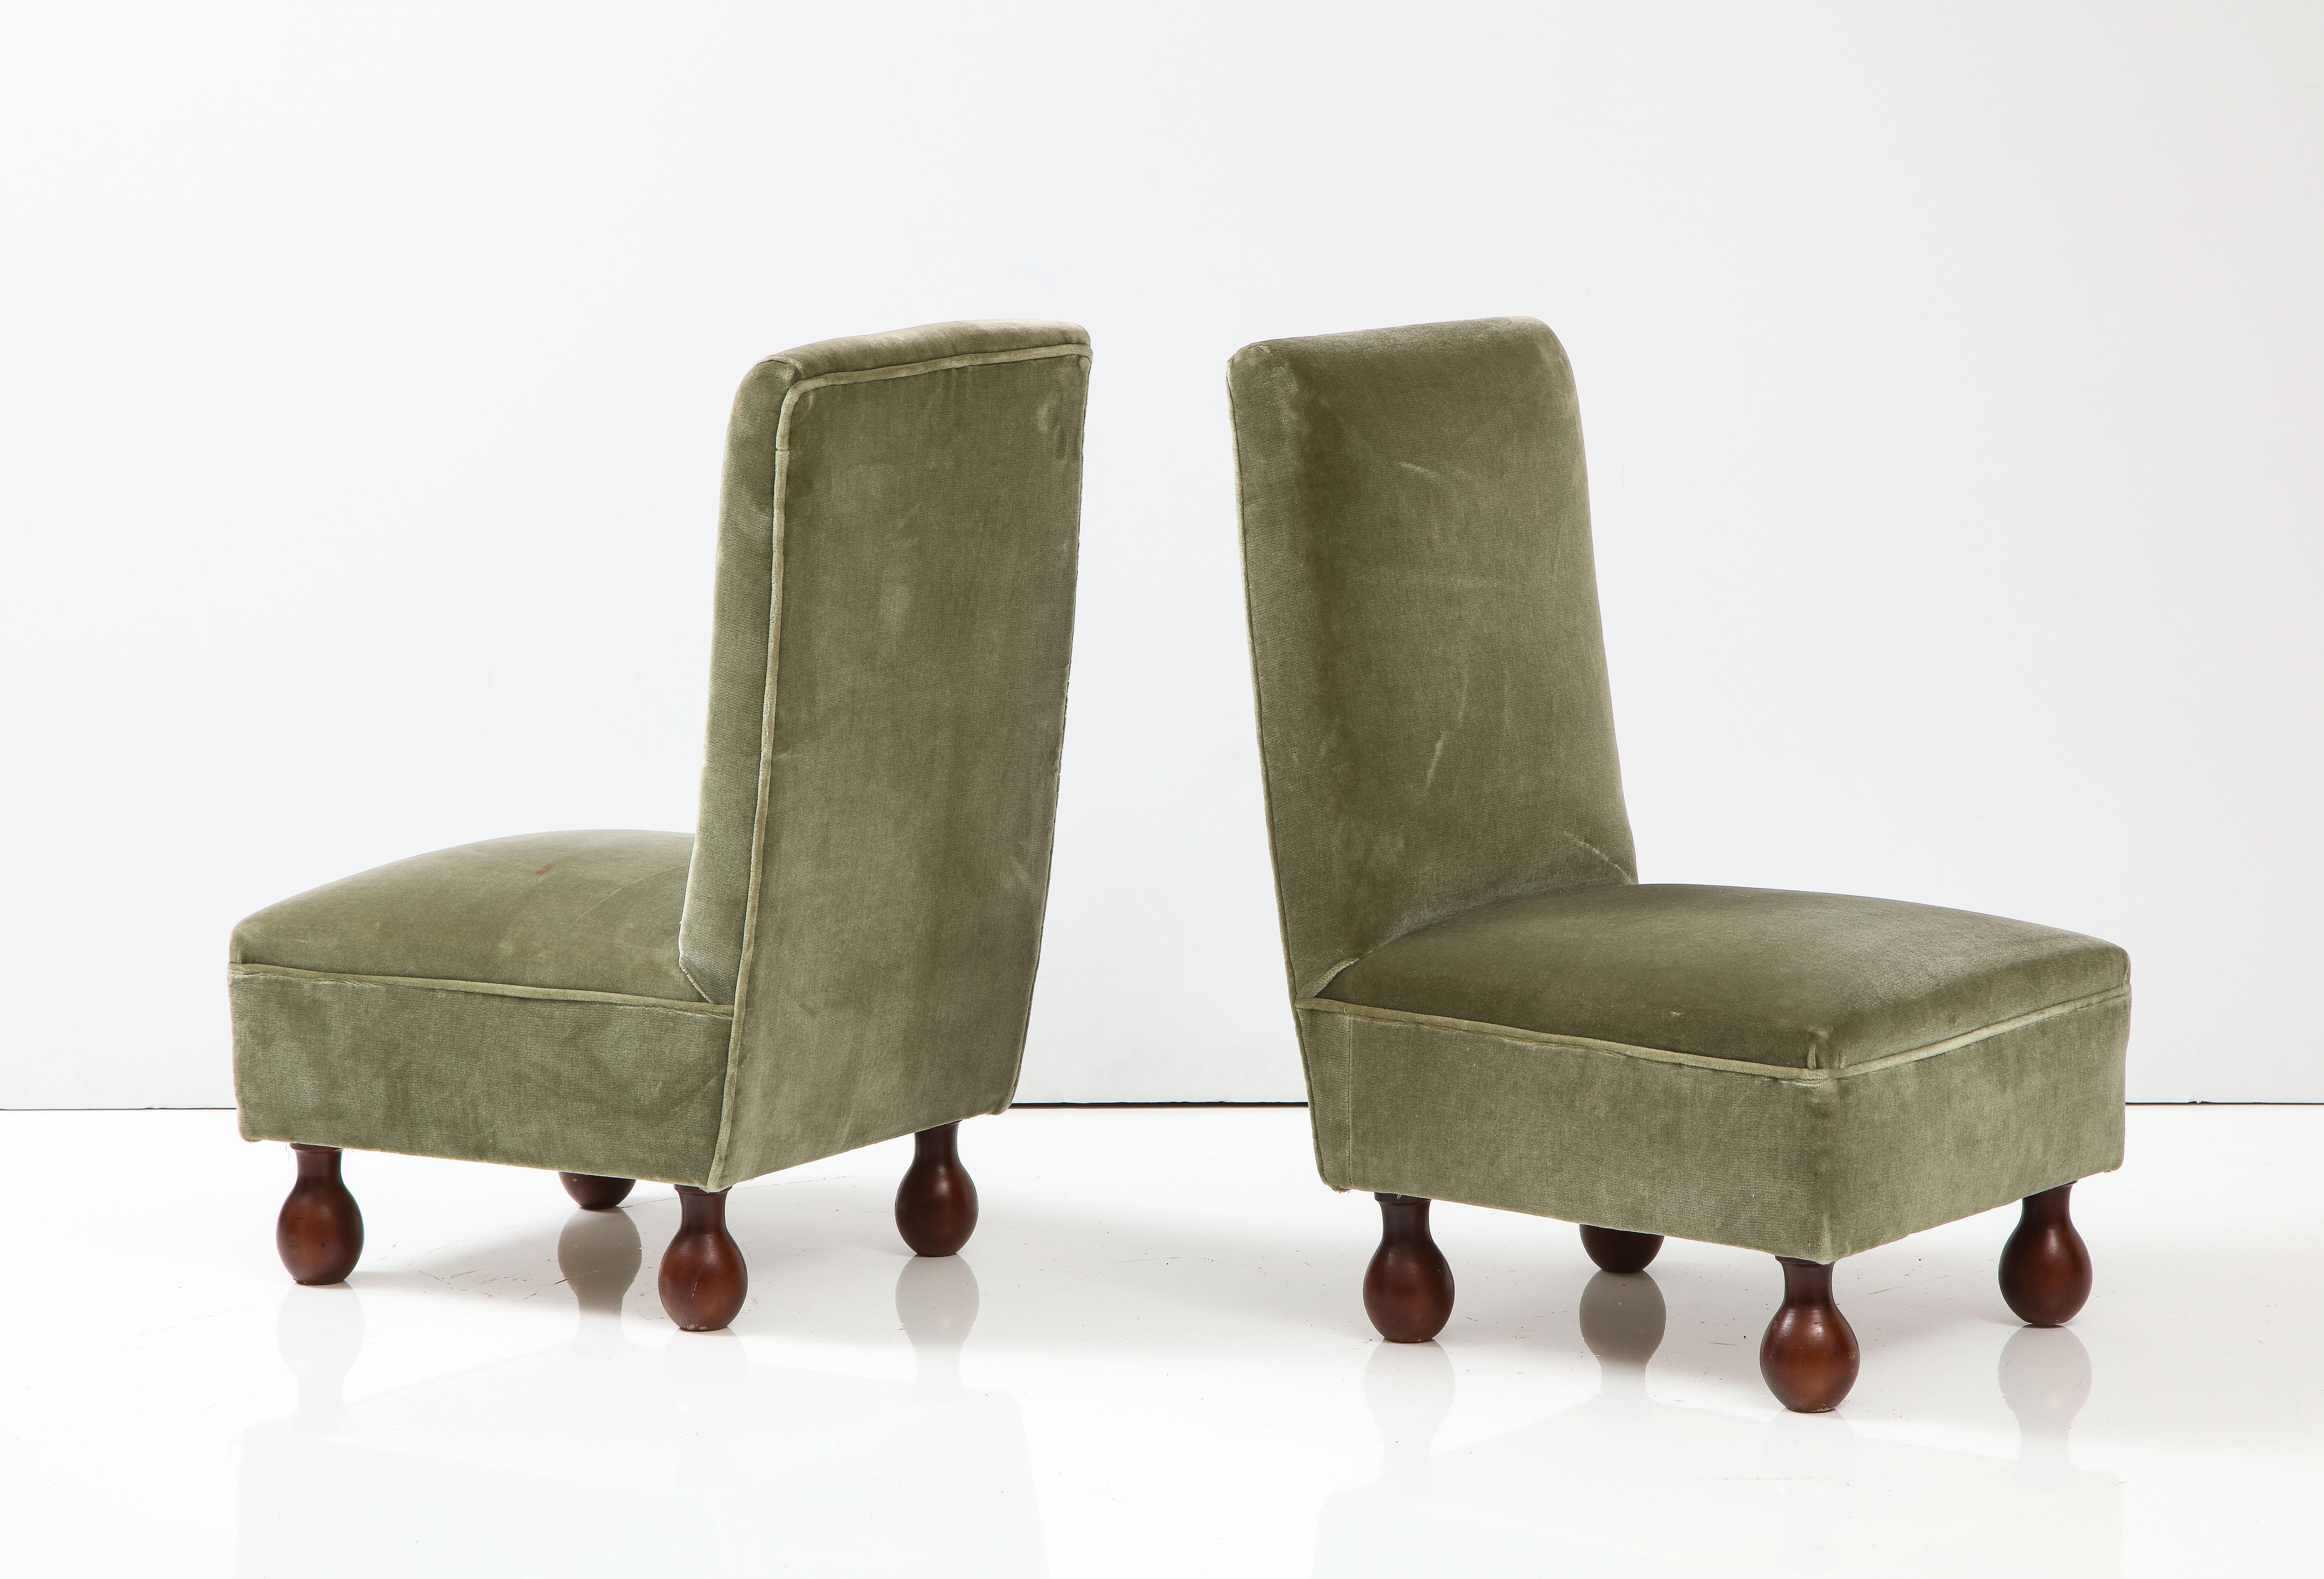 Mid-20th Century Italian 1940's Living Room Suite, Sofa, Pair of Chairs, Pair of Slipper Chair